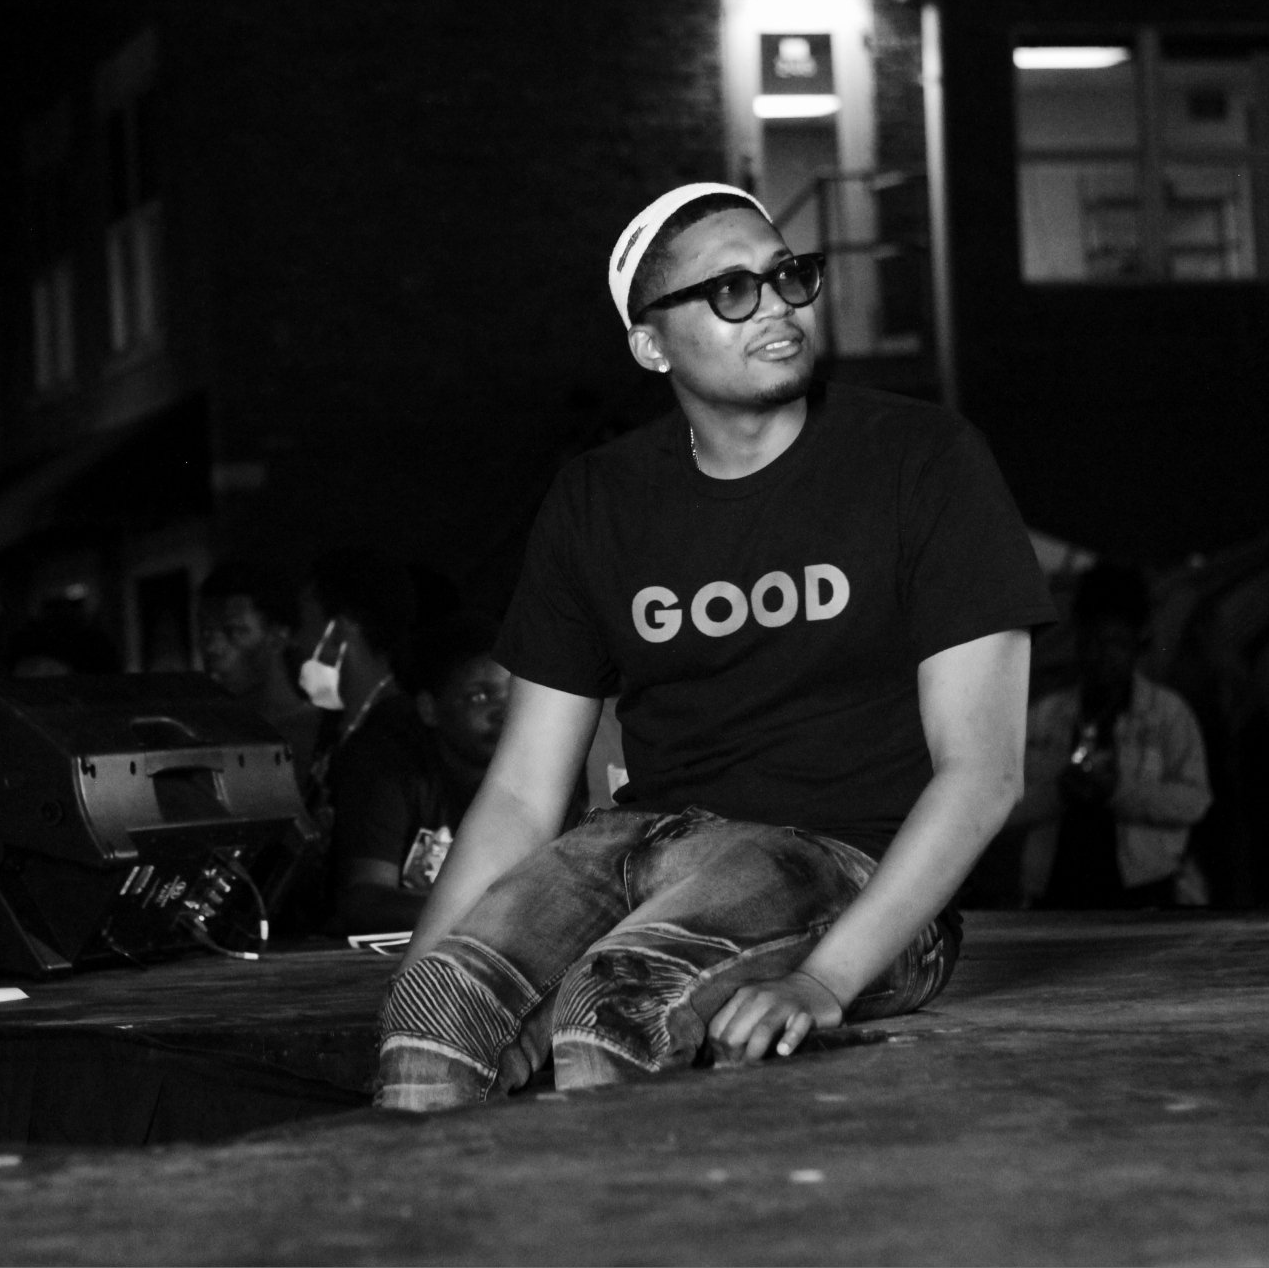 GOODProjects founder and CEO, Darius Baxter